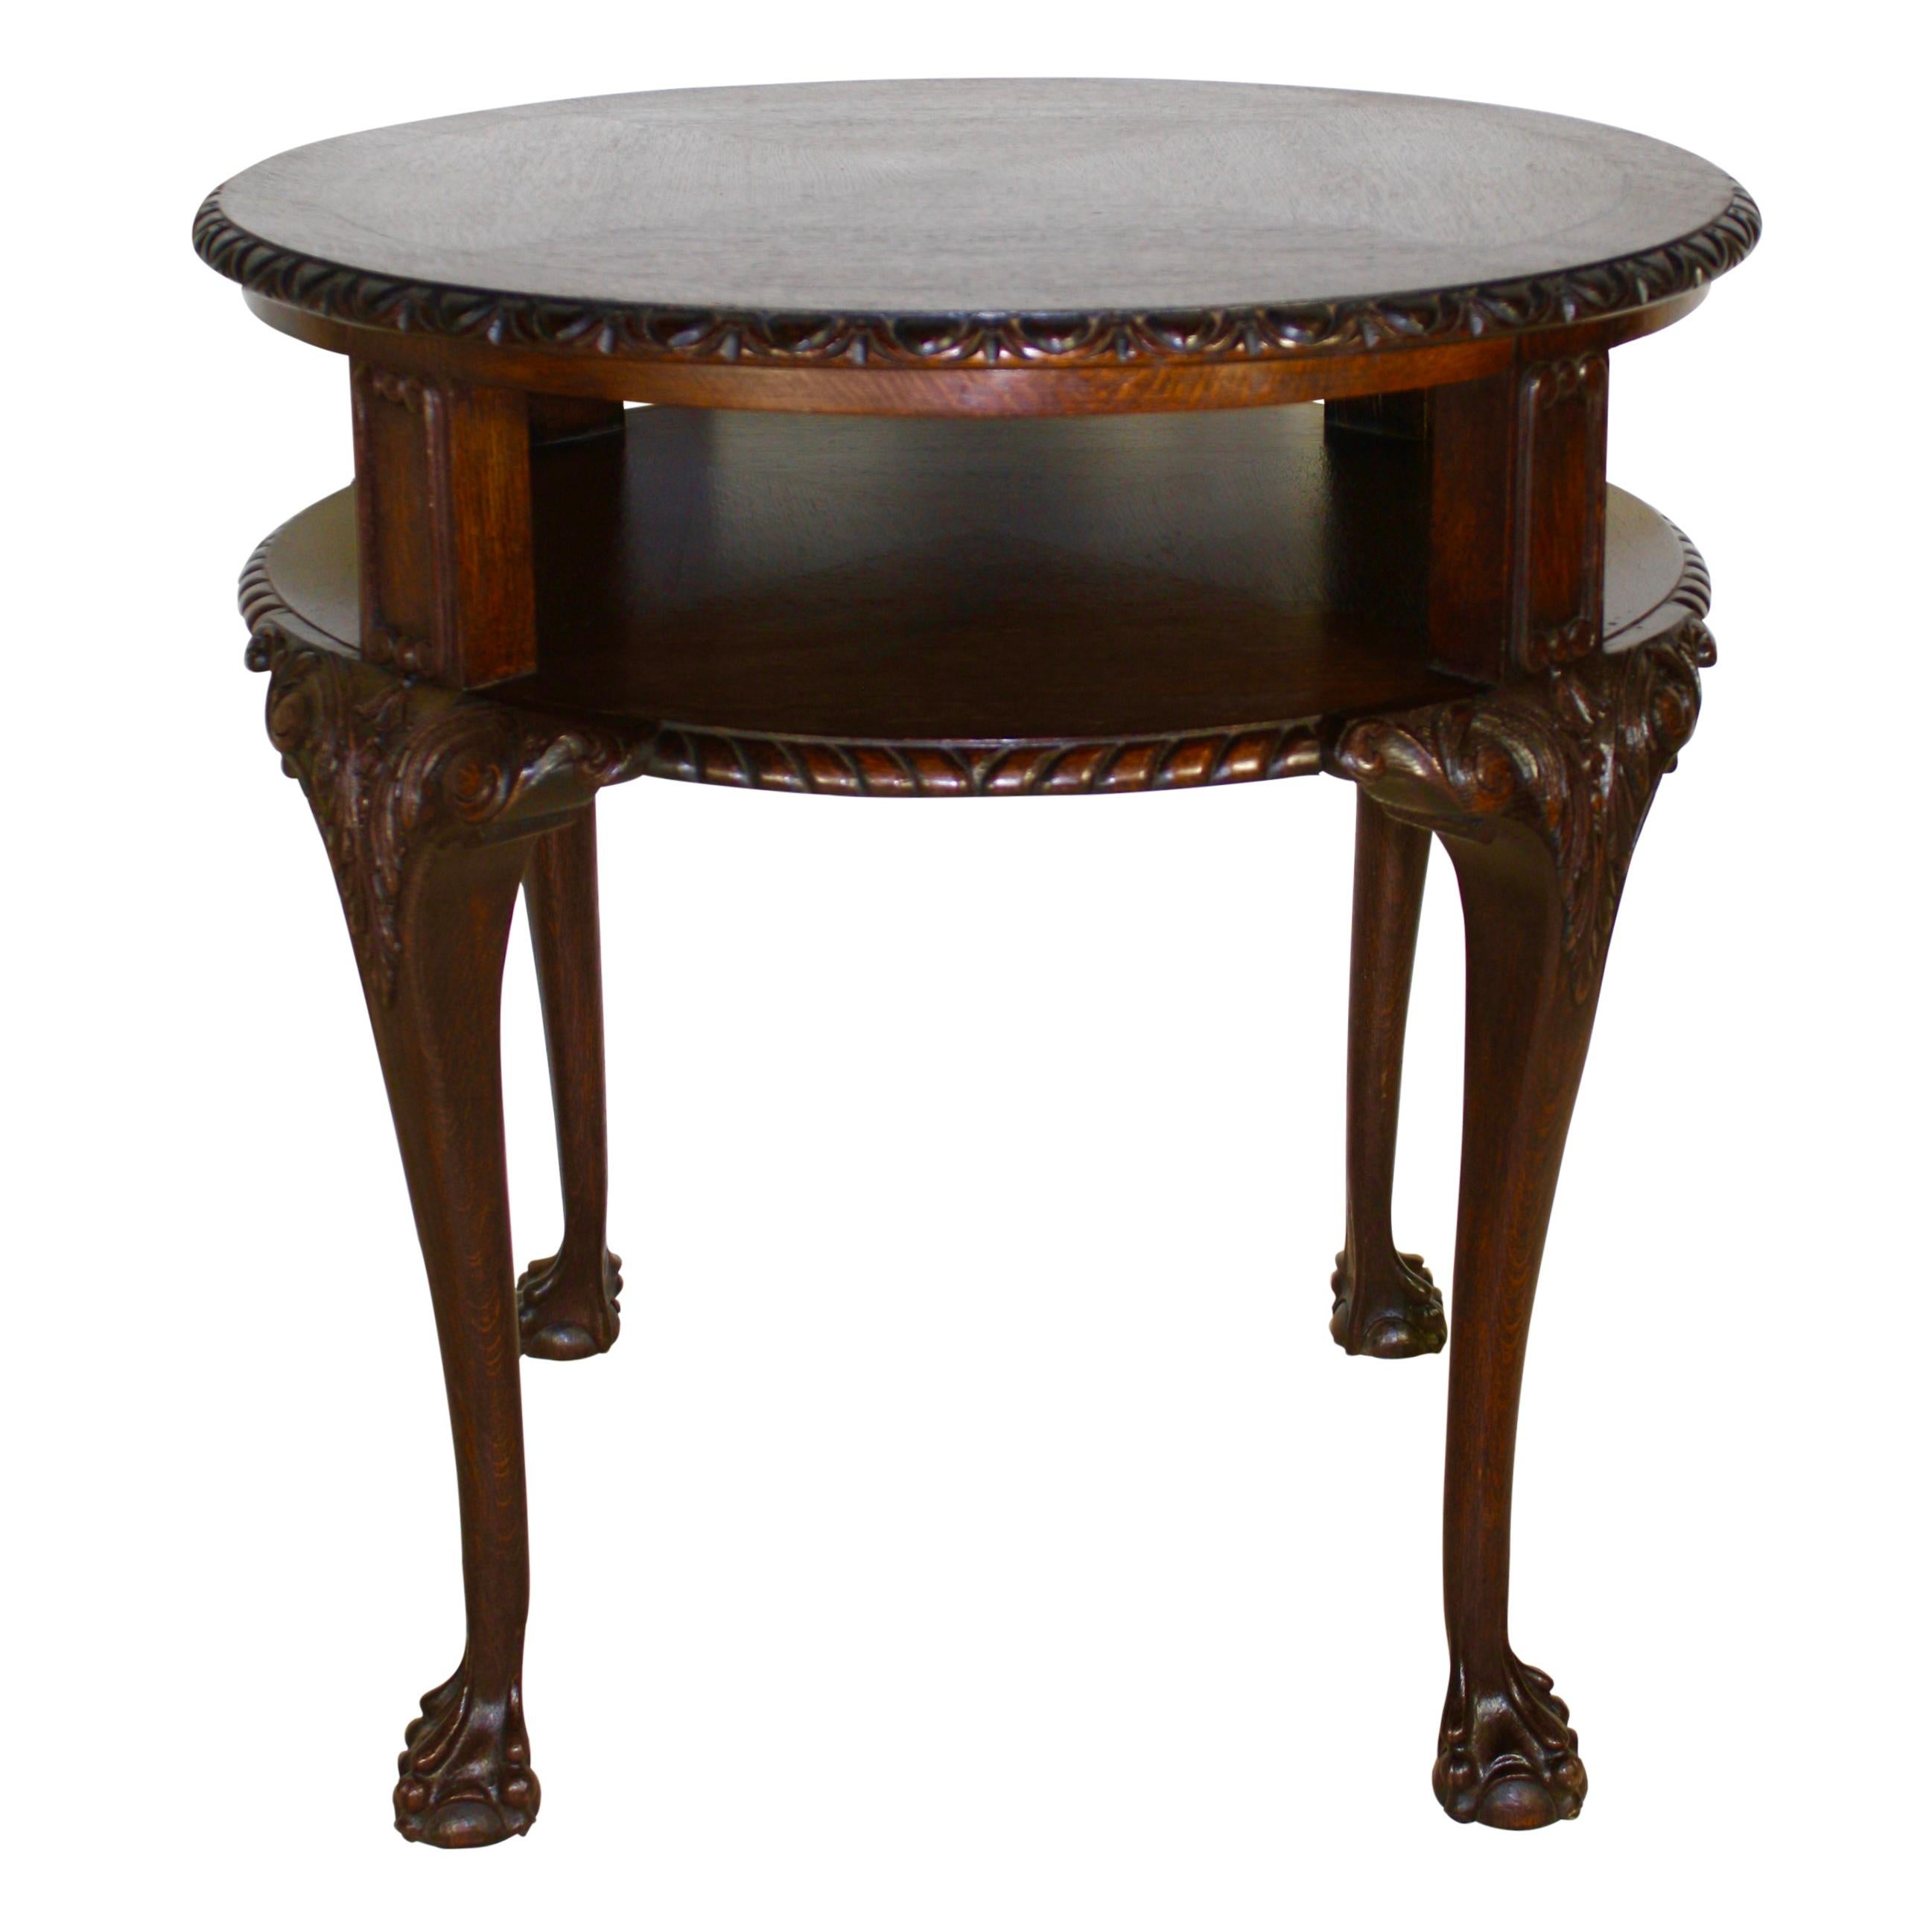 Delicately inlaid with a single band, this elegant side table features a top tier with a beveled edge and egg and dart trim. The lower tier sits 5.5 inches below the bottom of the top tier and is finished with rope trim around the outer edge. The